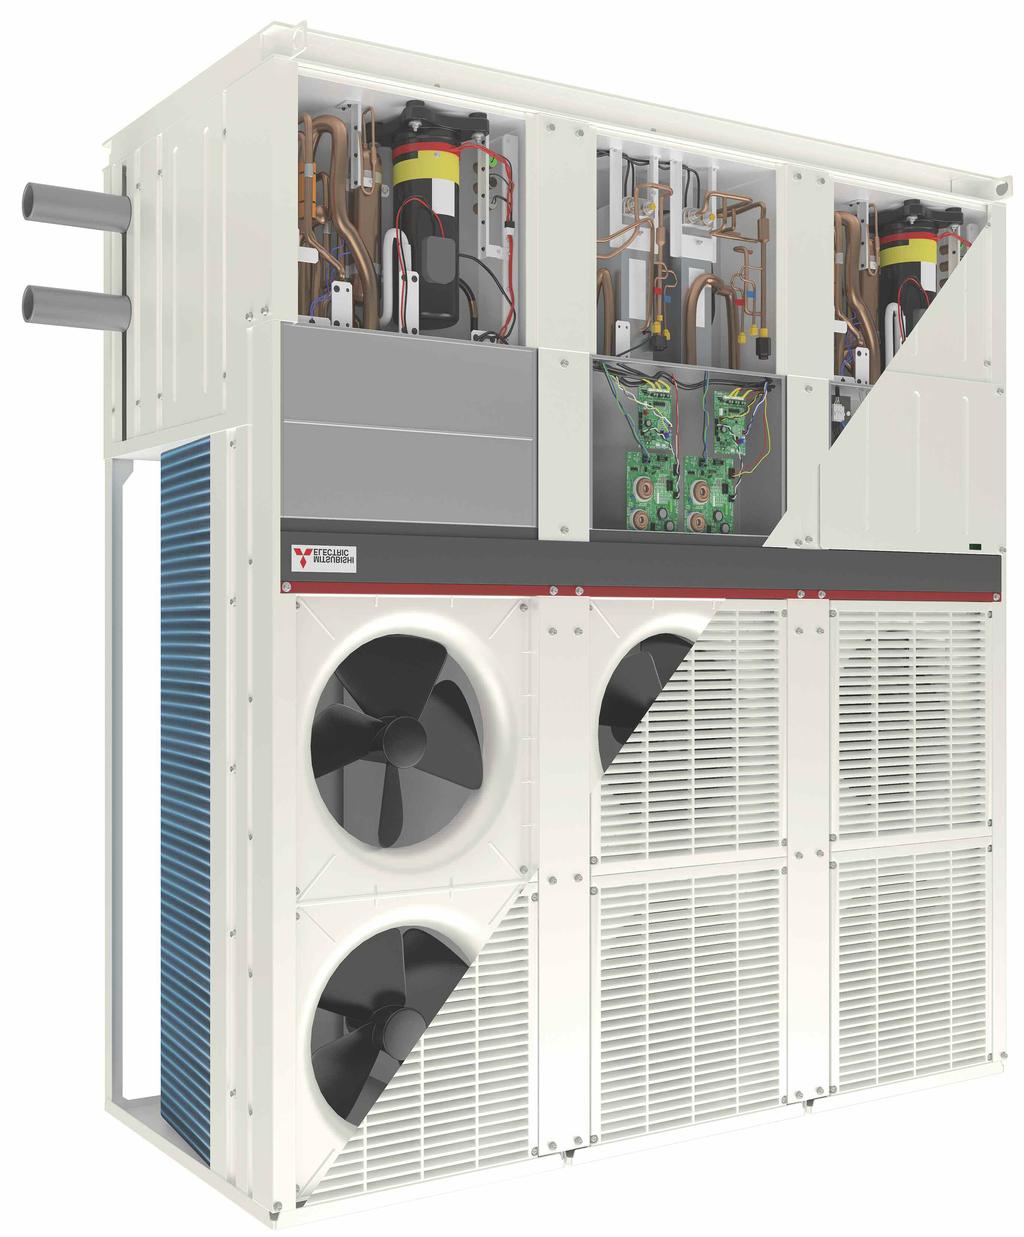 3MW of cooling and heating to the building, the modular approach of the e-series chiller range reduced both space and weight on the rooftop and the in-built